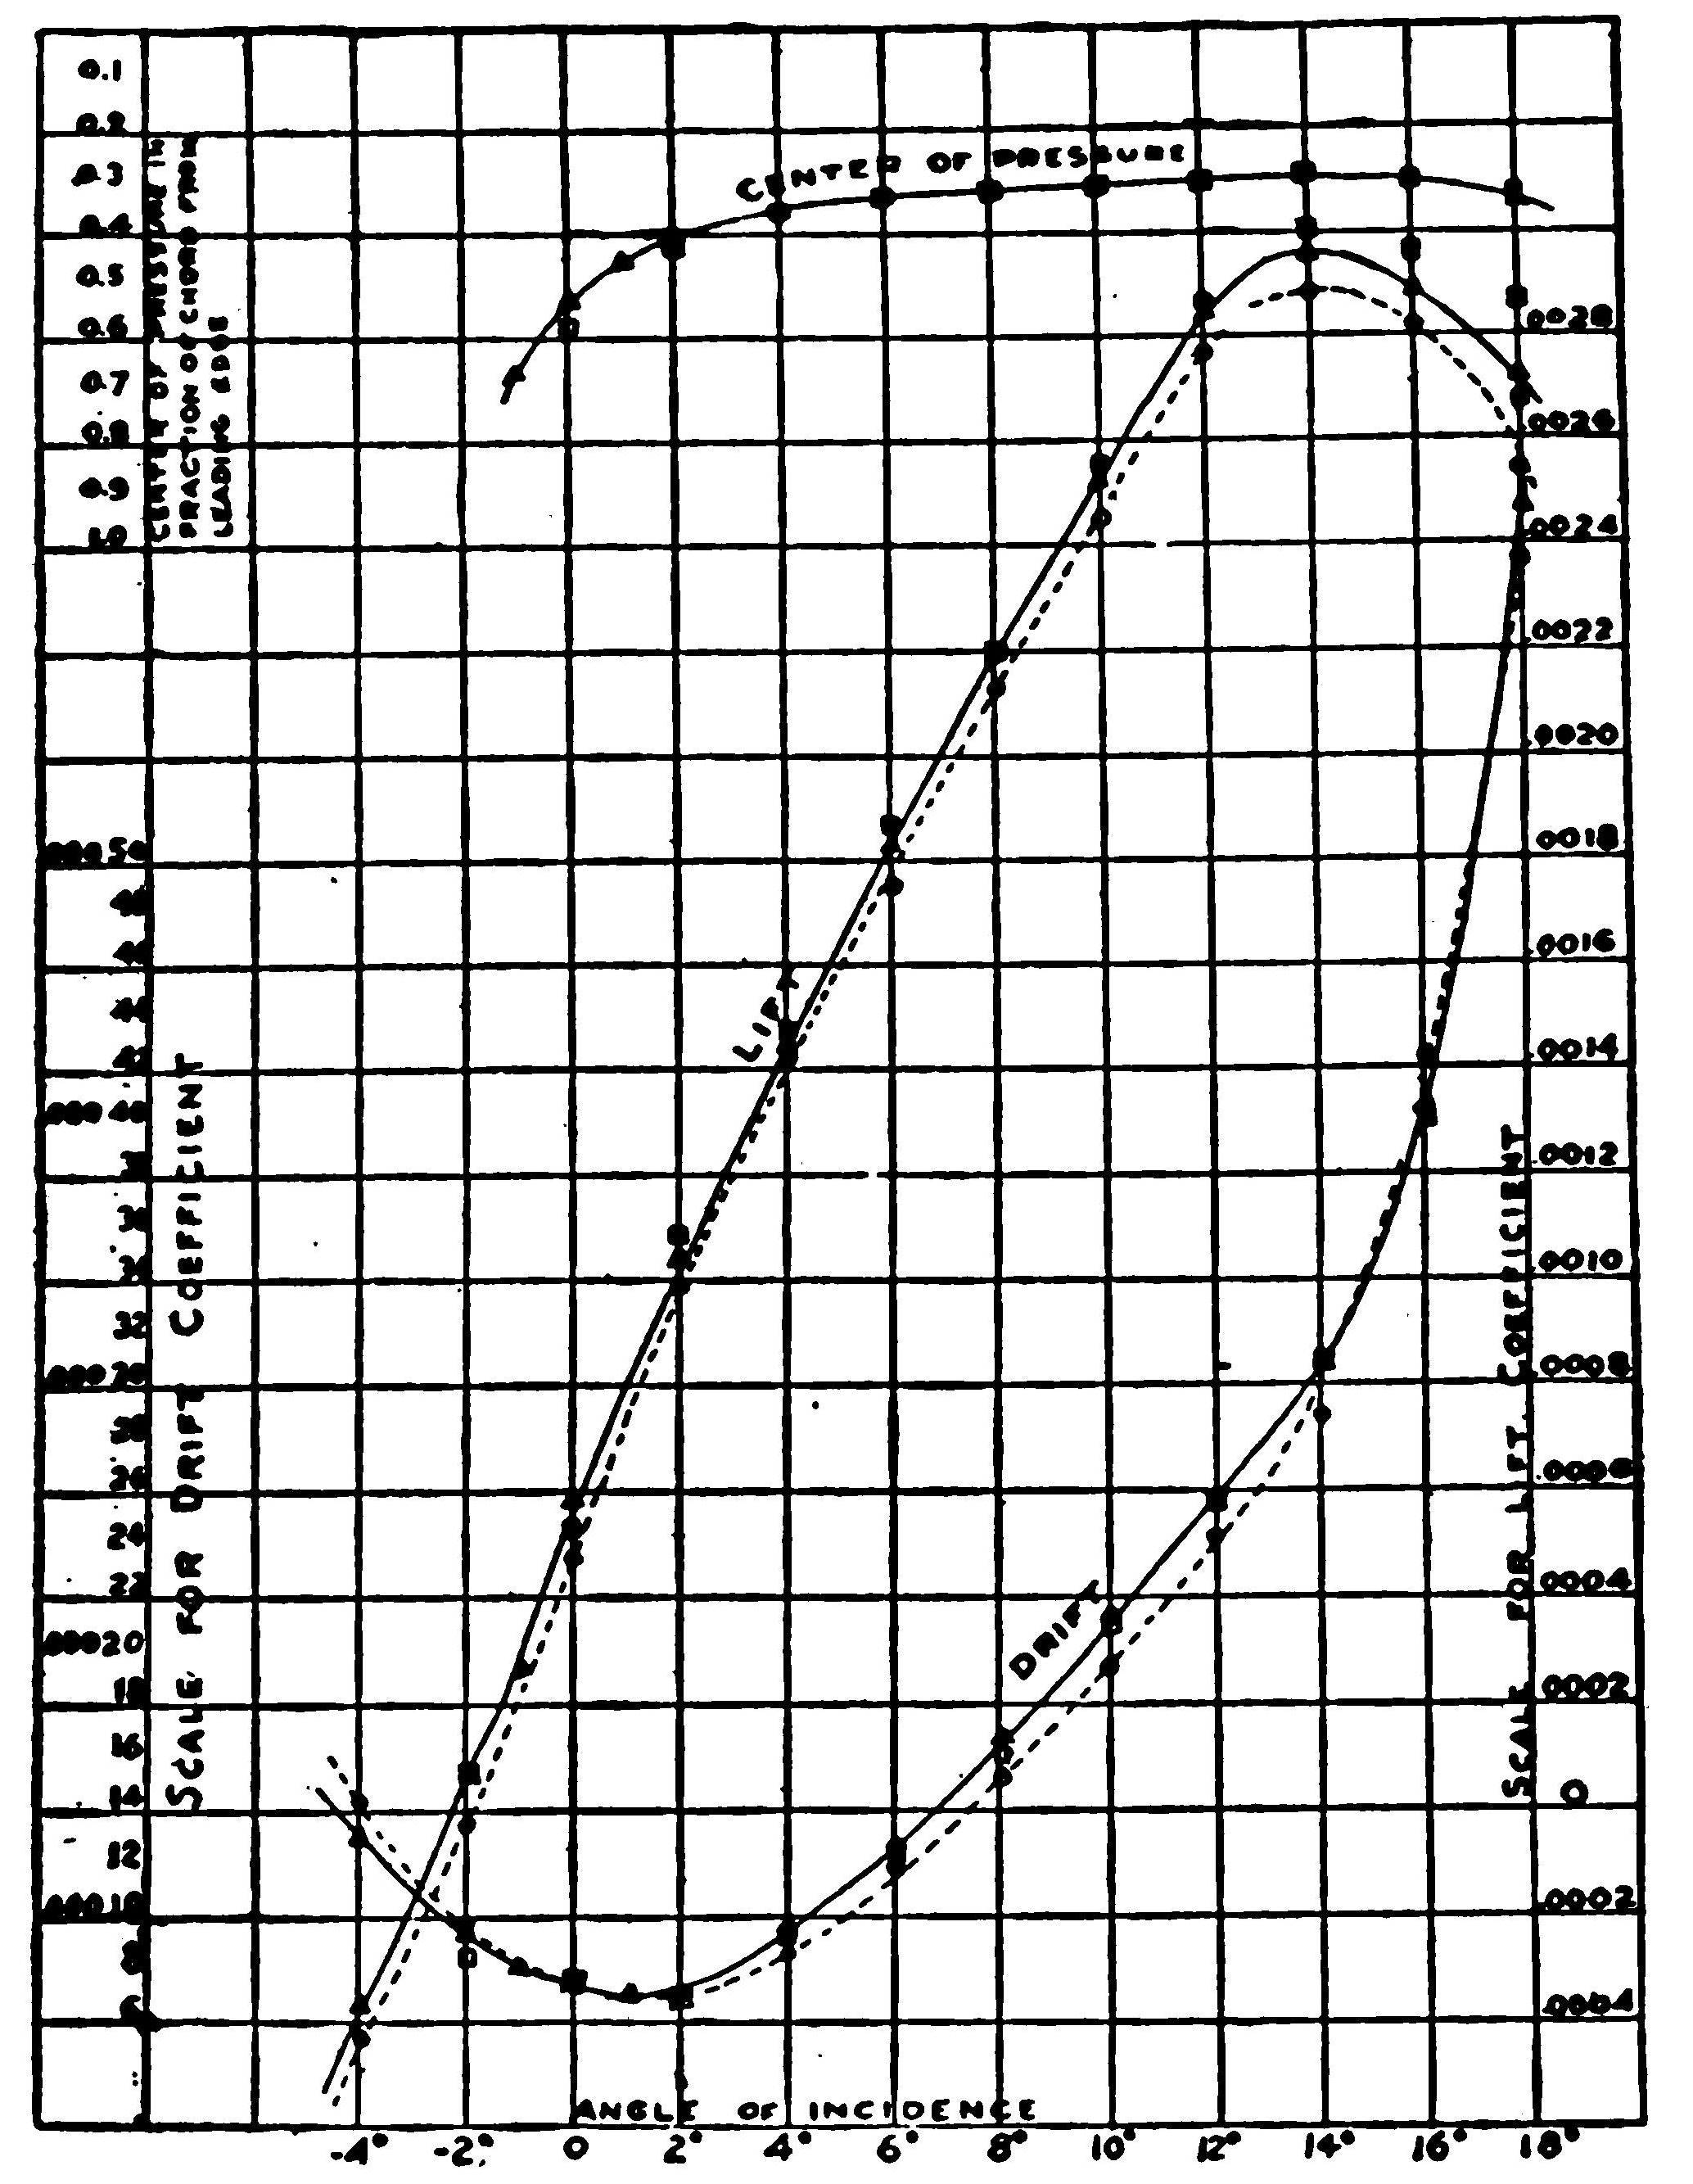 Fig. 6. Chart of R.A.F.-6 Wing Section with Three Independent Curves.